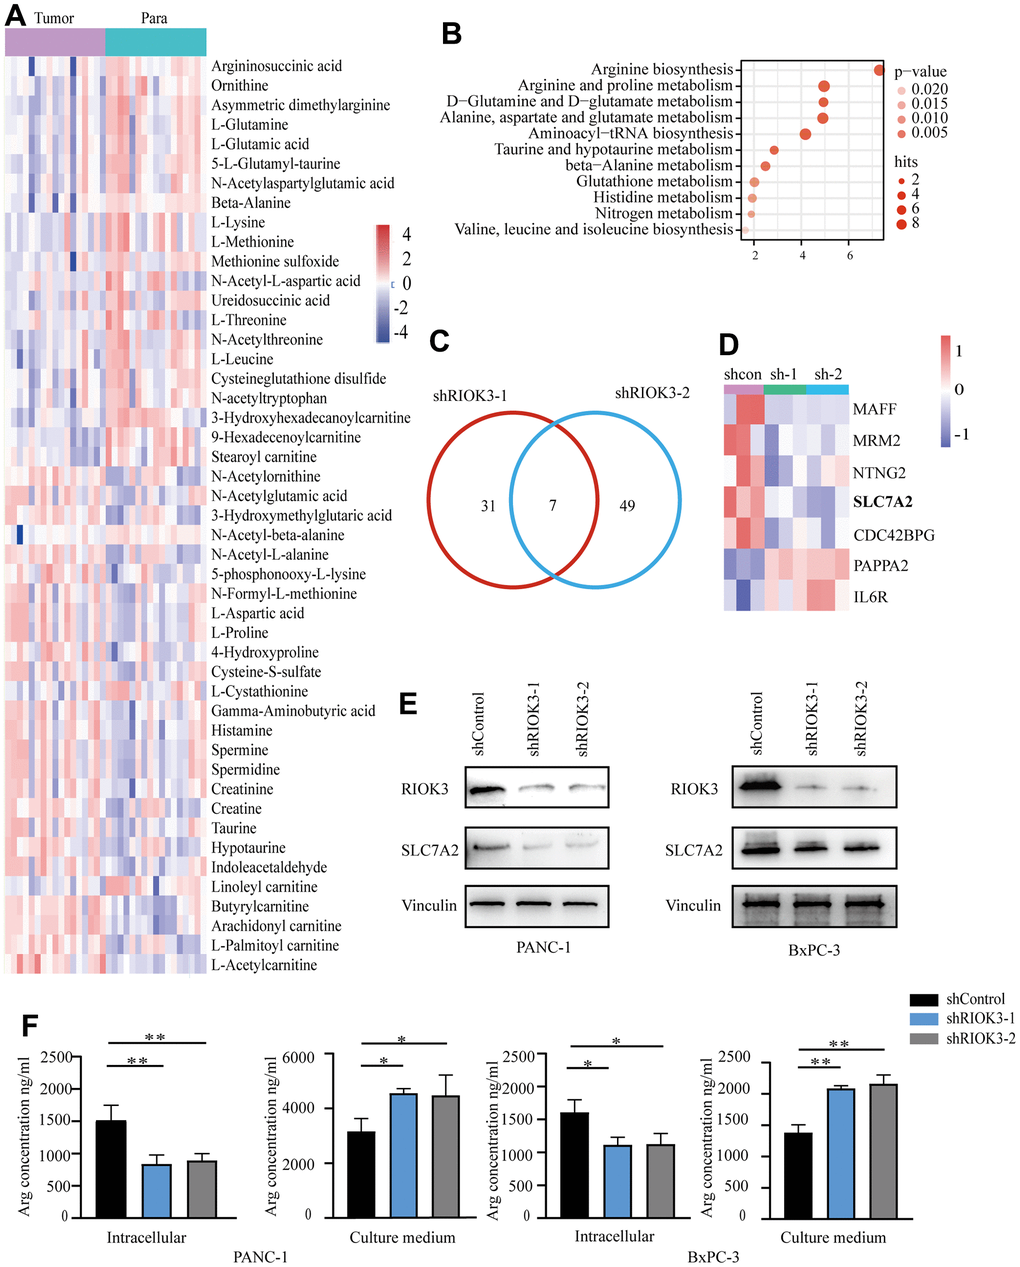 Metabolomic and transcriptional profiling reveals RIOK3 promotes arginine uptake in PDAC cells by upregulating SLC7A2 expression. (A) Heatmap of the differential metabolites of high-RIOK3 expression PDAC tissues compared with the paired adjacent normal tissues based on nontargeted metabolomic analysis (| Log2FC |>1, pB) KEGG pathway enrichment analysis of the 47 differential metabolites. (https://www.metaboanalyst.ca/). (C) Venn diagram summarizing that 7 mRNAs were detected in the two independent RIOK3-knockdown cells (| Log2FC |>1, pD) Heatmap of 7 mRNAs that were detected in the two independent RIOK3-knockdown cells (| Log2FC |>1, pE) Western blot analysis of RIOK3 and SLC7A2 in shRIOK3-1/2 cells (PANC-1 and BxPC-3 cells, respectively). One-way ANOVA test. (F) The content of Arg was analyzed in the intracellular and culture medium of shRIOK3-1/2 cells (PANC-1 and BxPC-3 cells, respectively). One-way ANOVA test. All experiments were performed independently at least three times. The star (*) symbol denotes the level of statistical significance: * p 